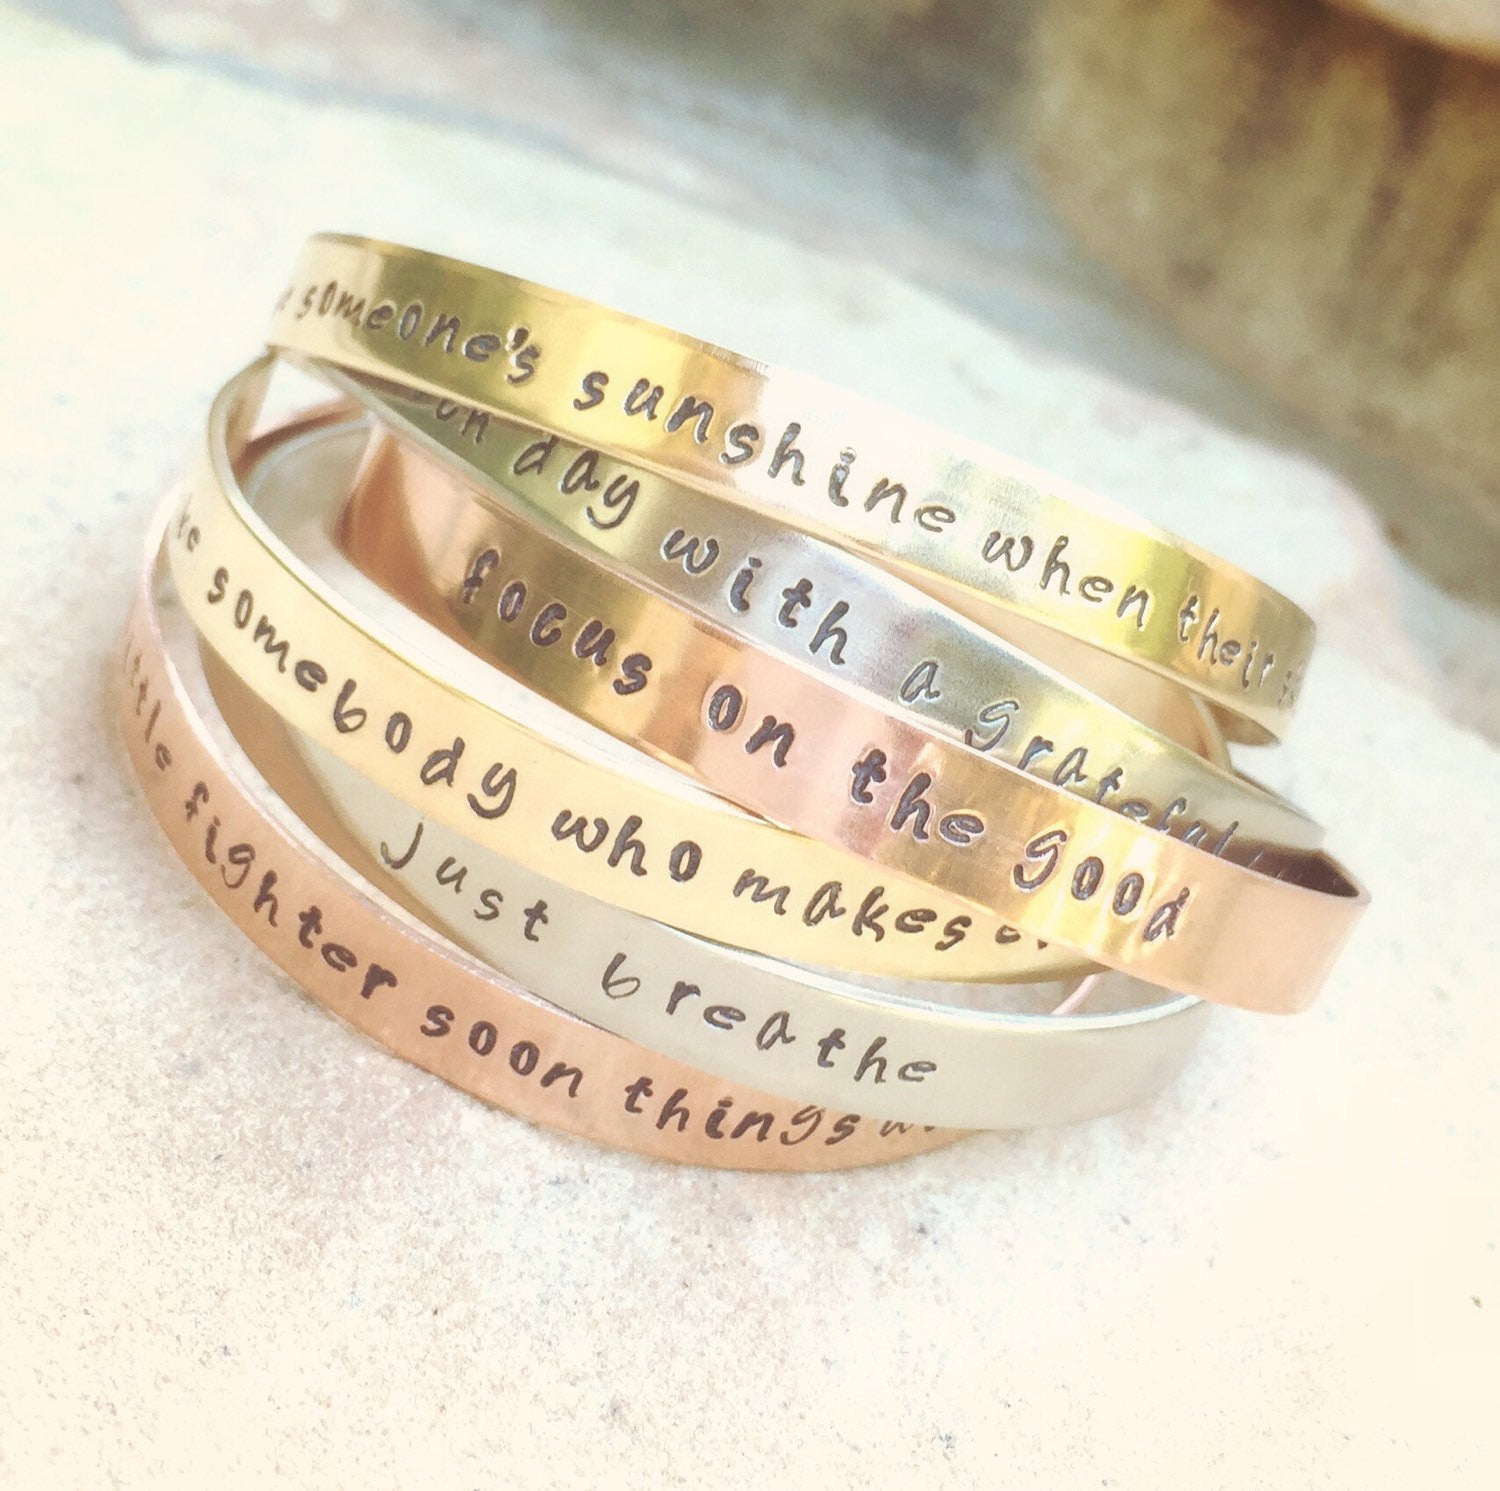 Inspirational Cuff Bracelets - Natashaaloha, jewelry, bracelets, necklace, keychains, fishing lures, gifts for men, charms, personalized, 